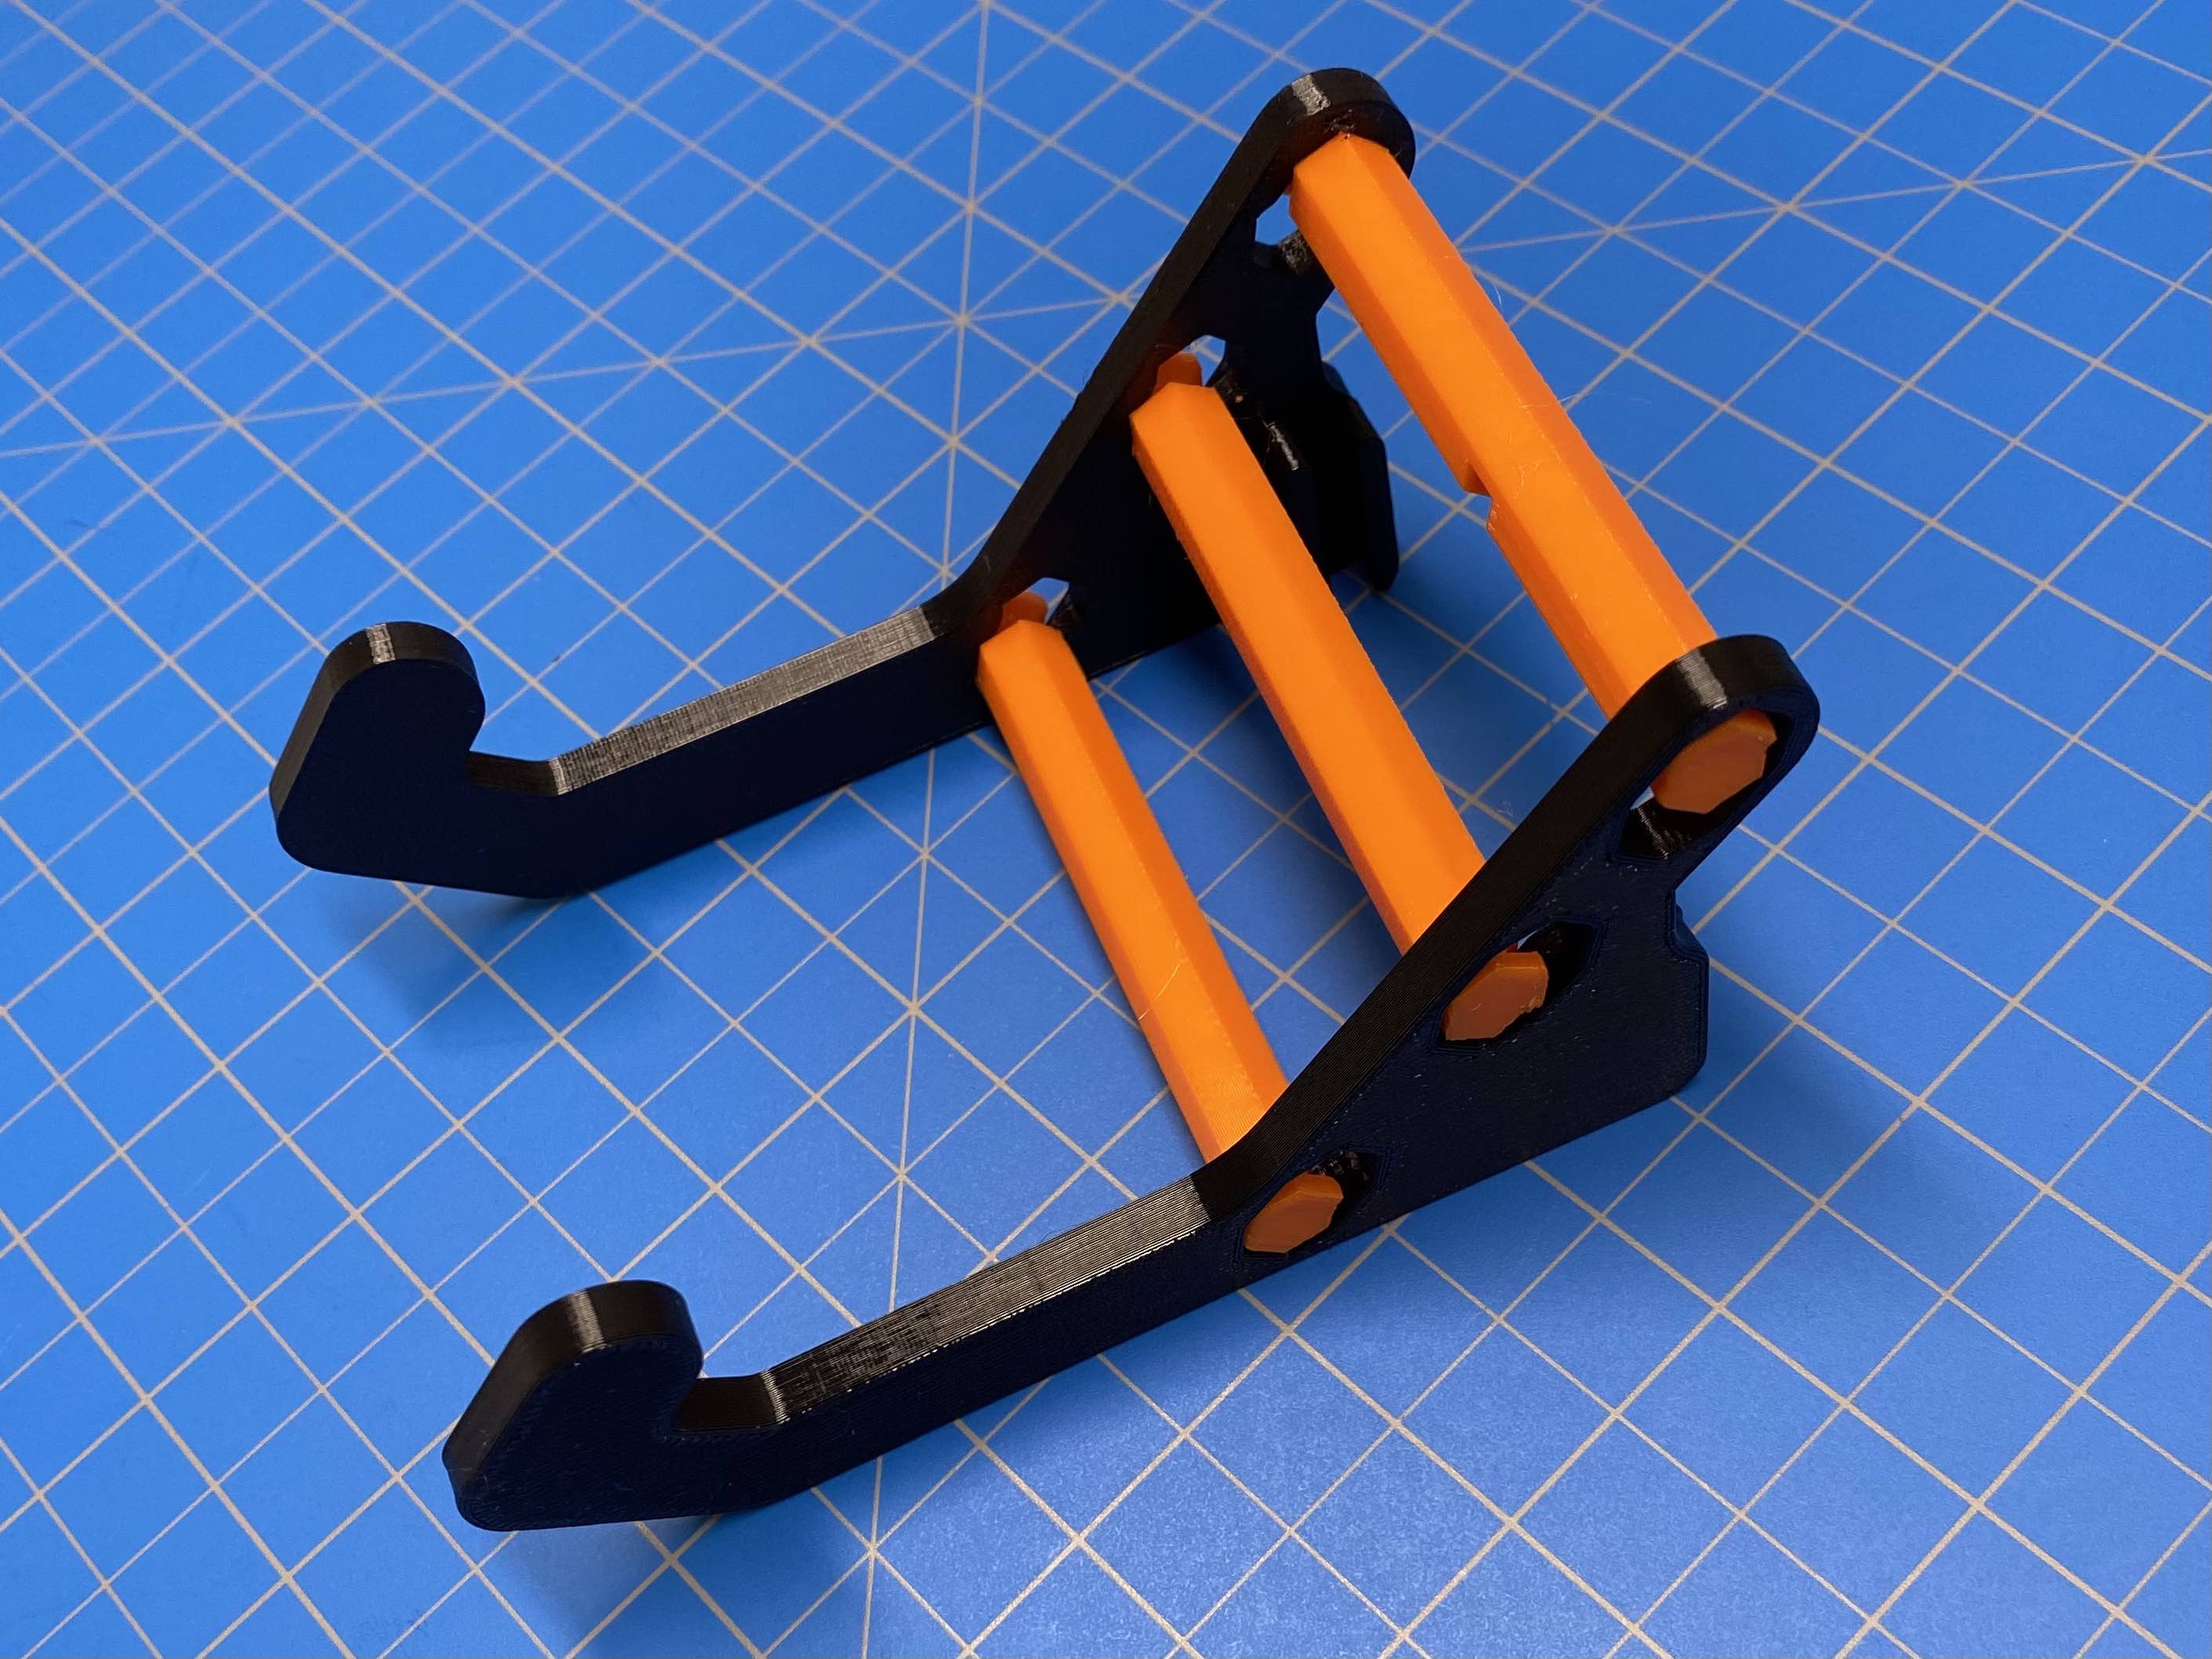 3D Printed Concept 2 Rower Phone Mount